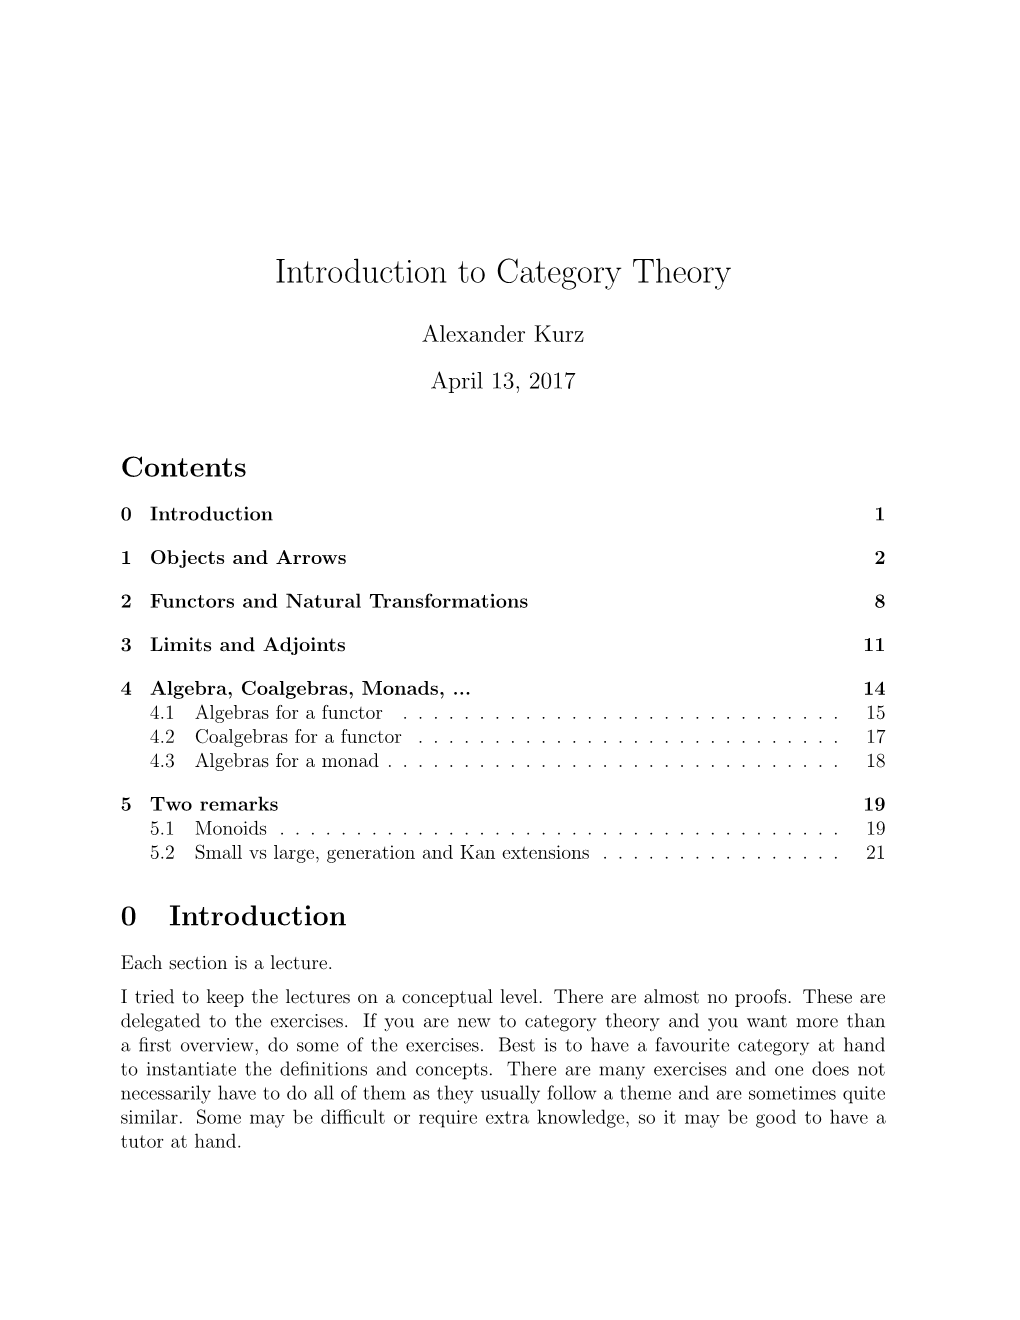 Introduction to Category Theory